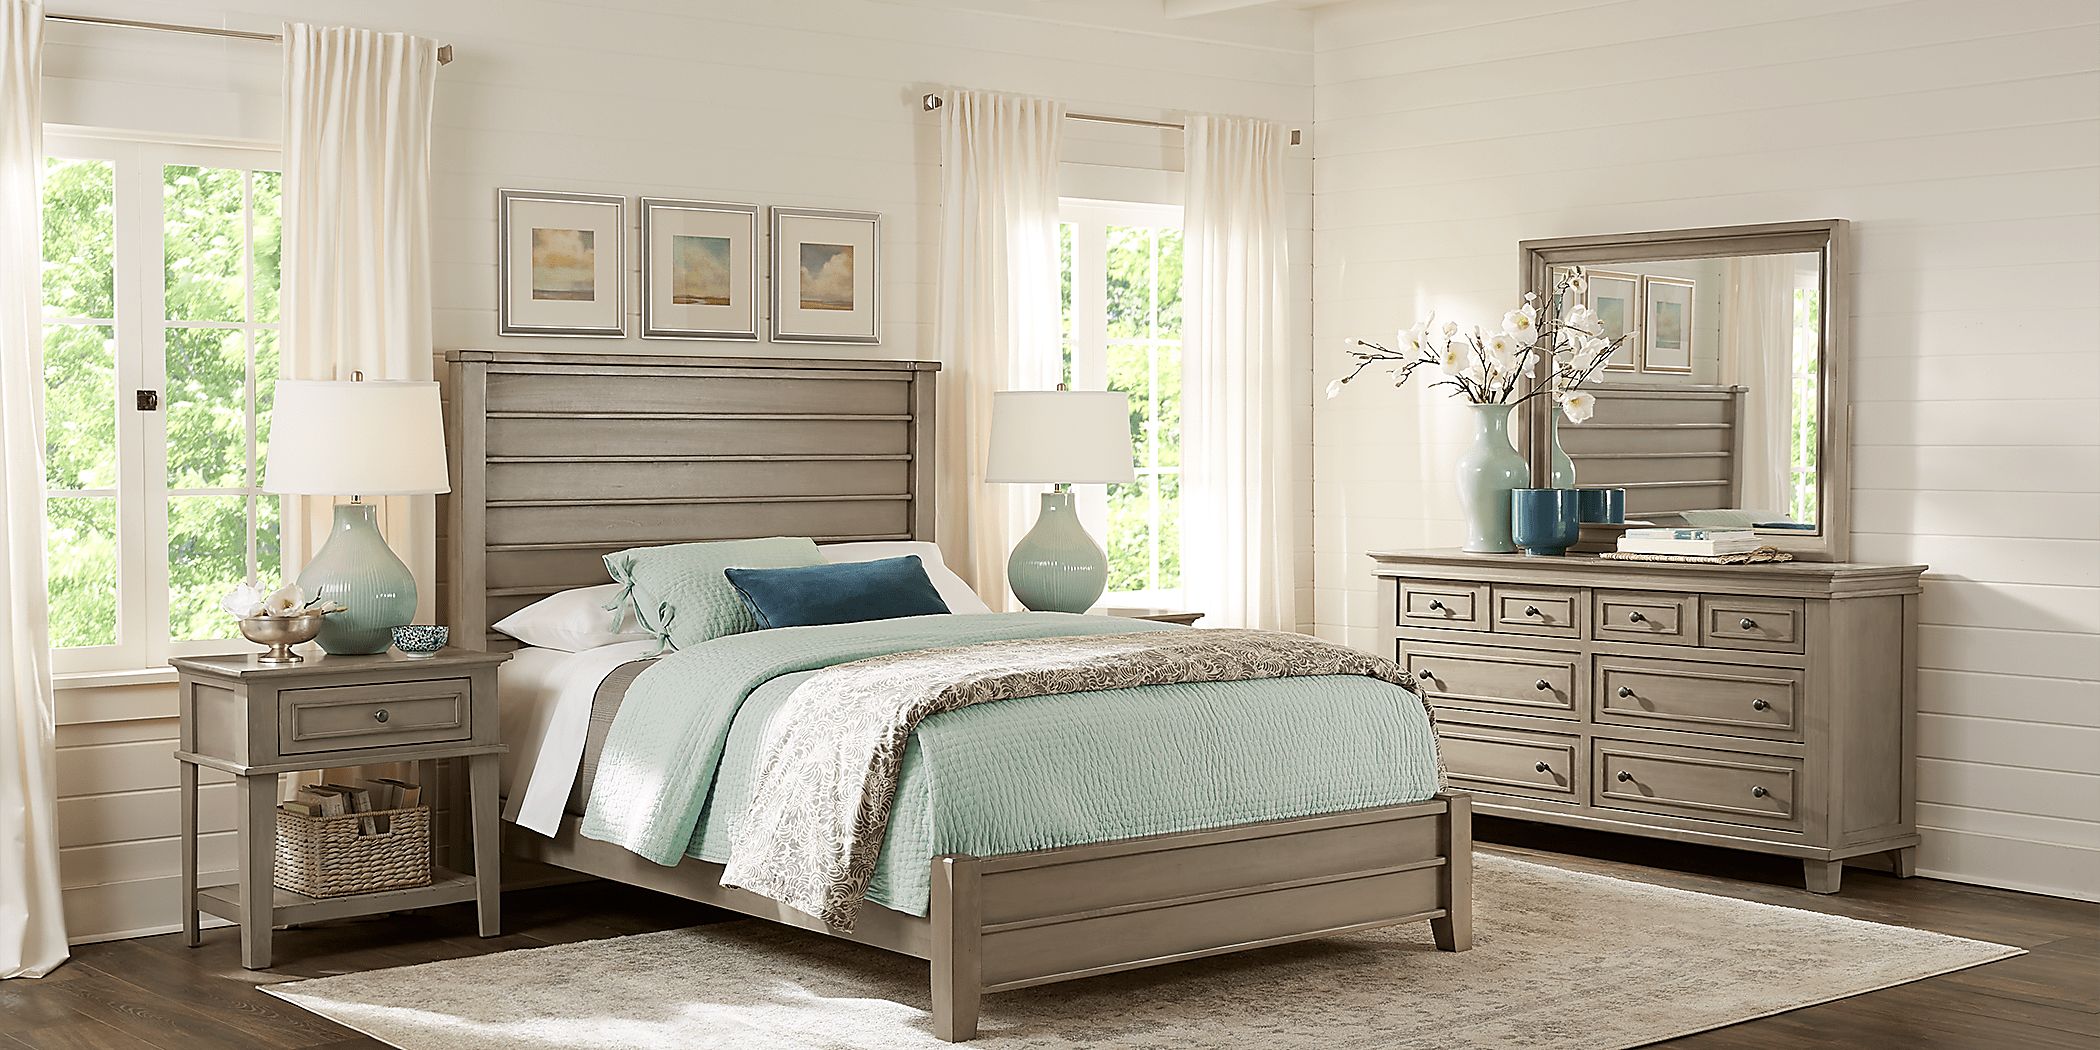 Rooms To Go Darby Brook Light Gray 3 Pc Queen Bed